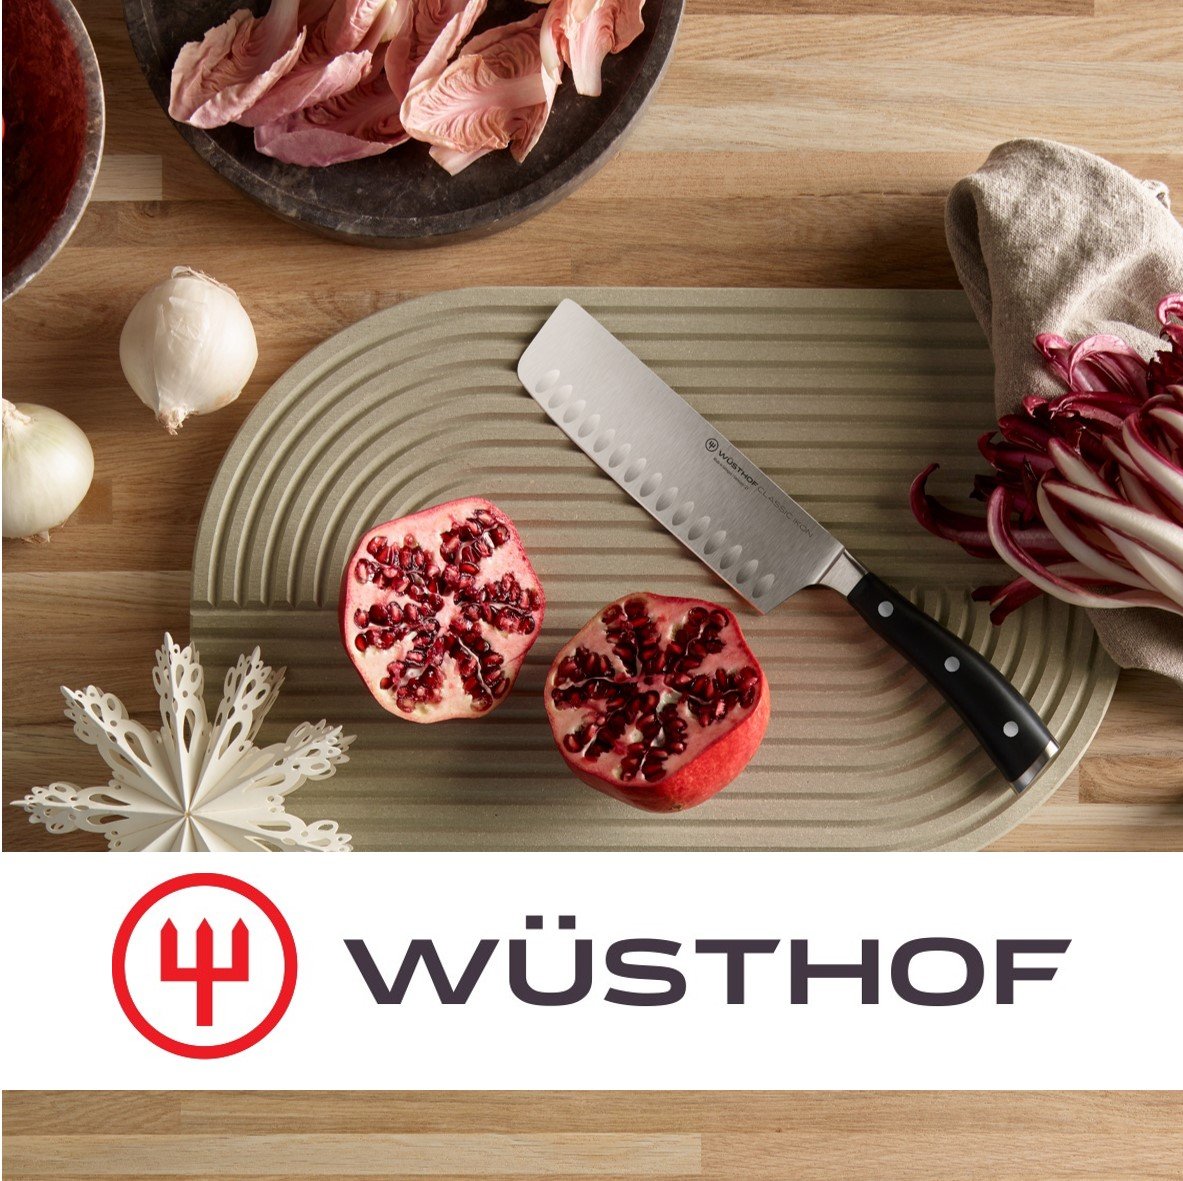 Wusthof Knives - The Cotswold Knife Company